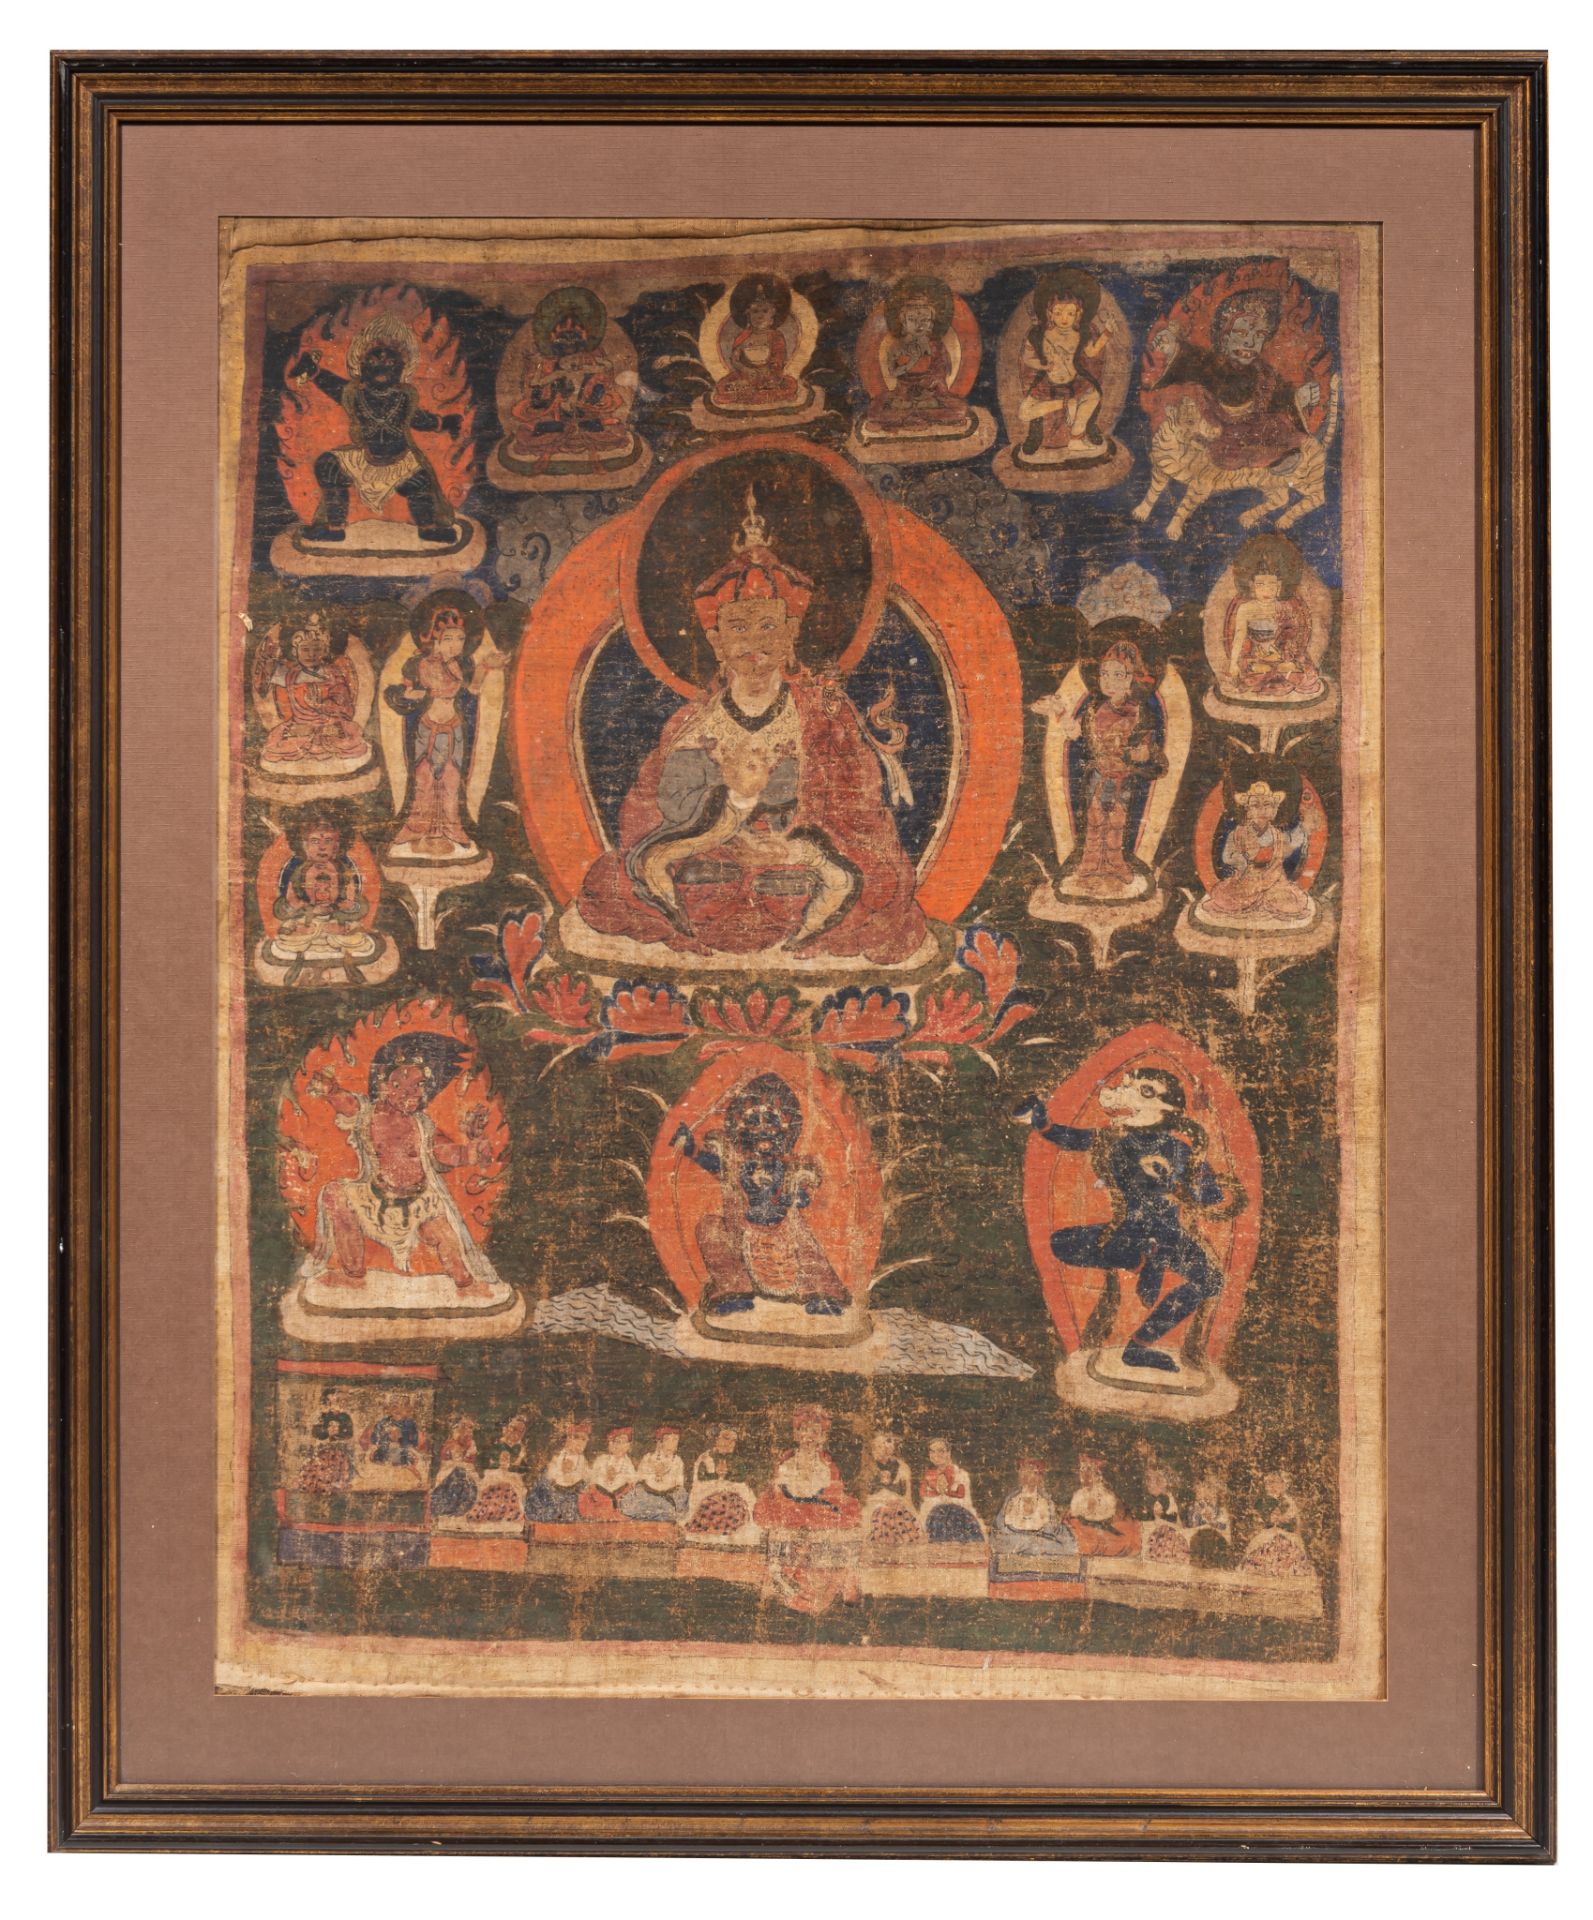 A Nepalese buddhist thangka, 18th/19th century, 59 x 75 cm - Image 2 of 5